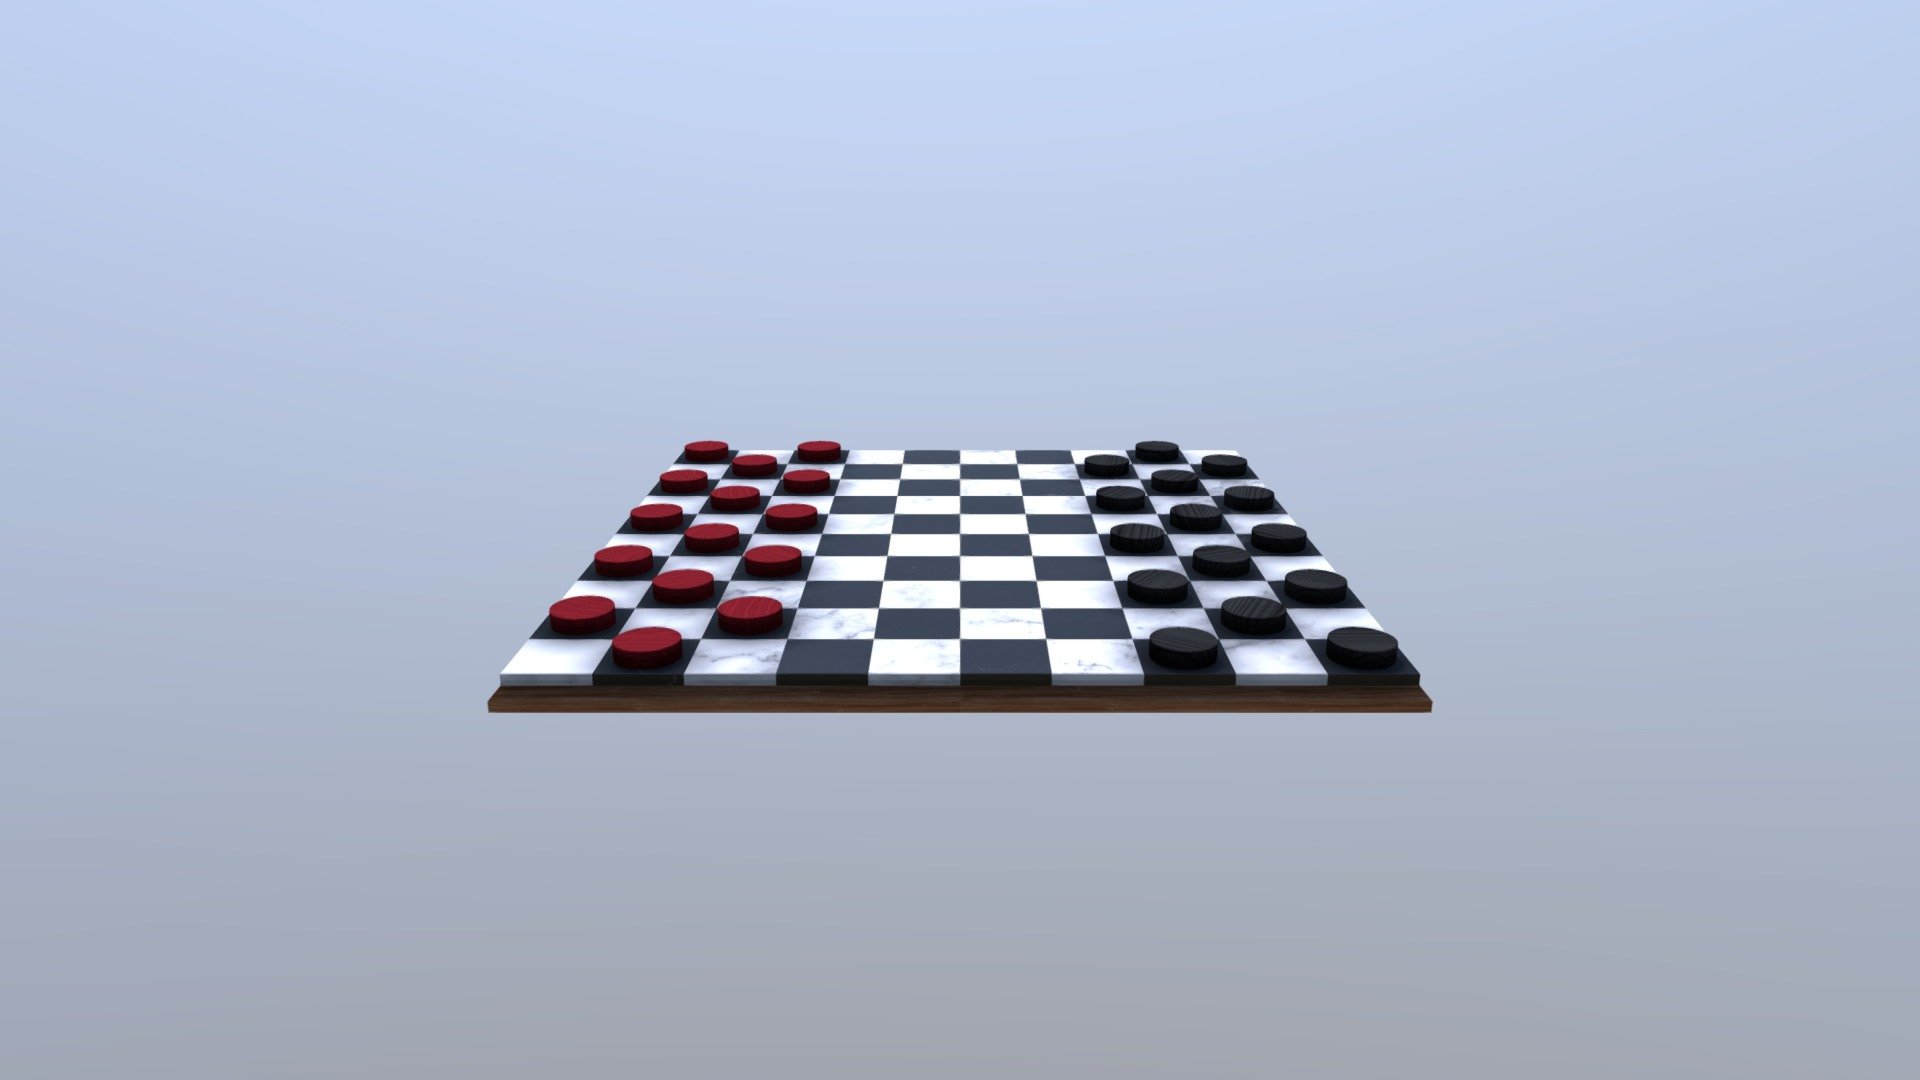 A game of Checkers/Draughts